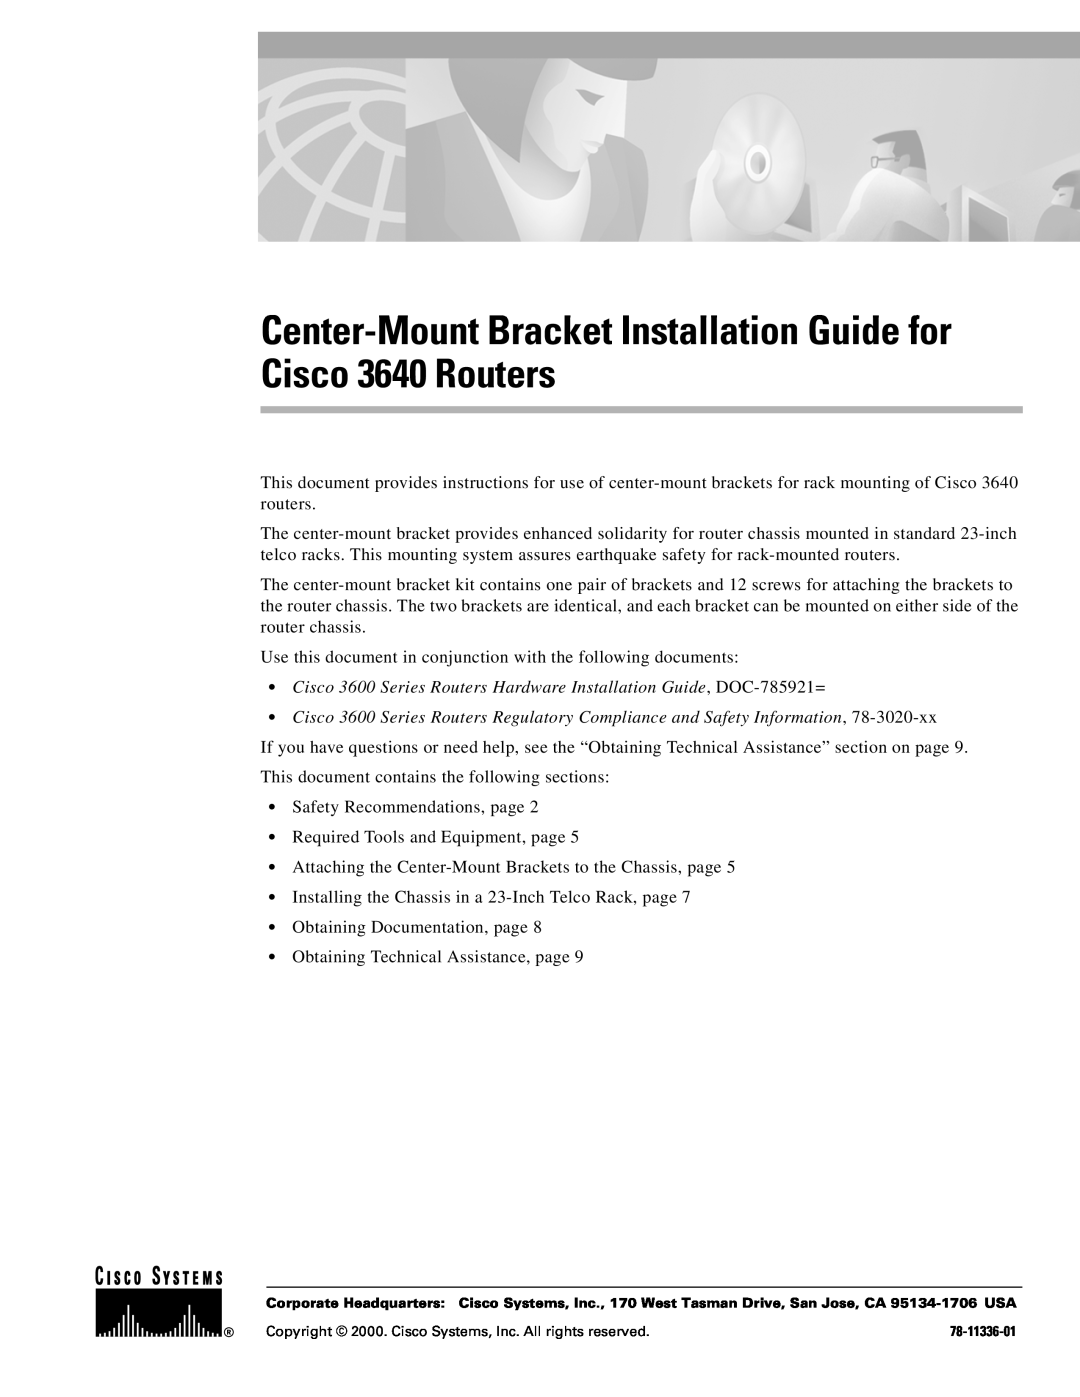 Cisco Systems manual Center-Mount Bracket Installation Guide for Cisco 3640 Routers 